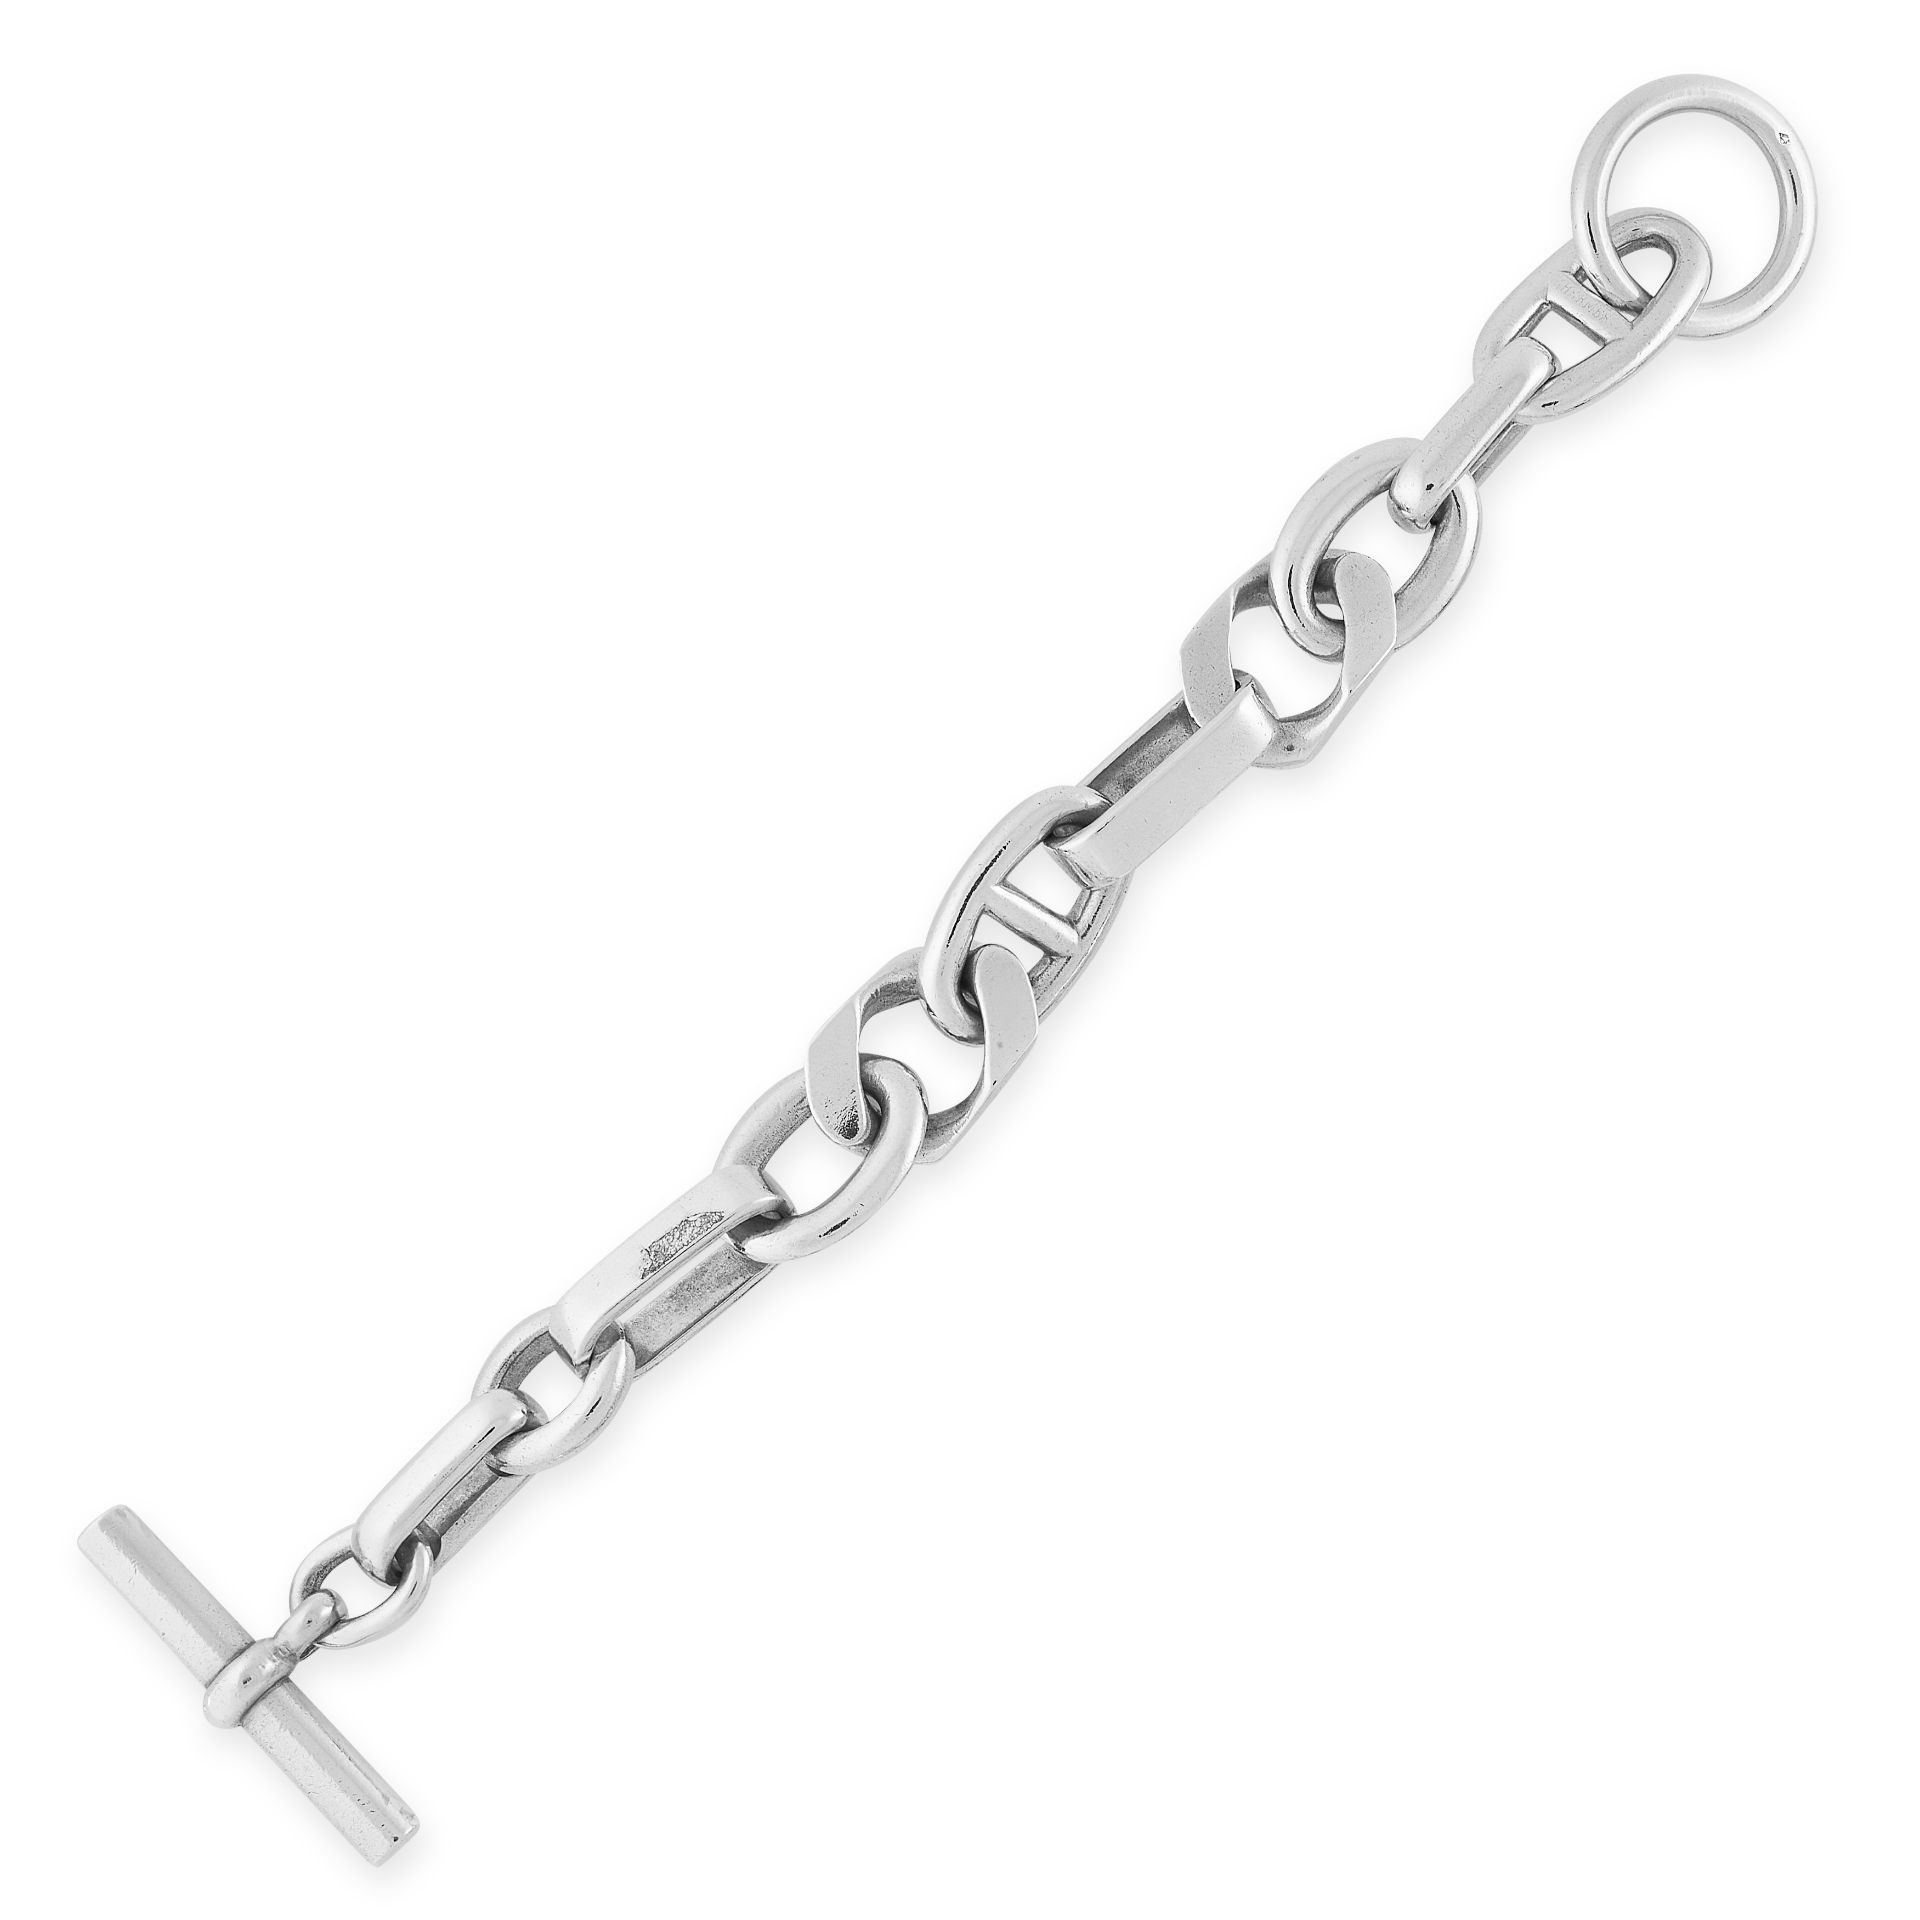 A CHAIN D’ANCRE BRACELET, HERMES PARIS in silver, formed of mariner, oval and curb links, with t-bar